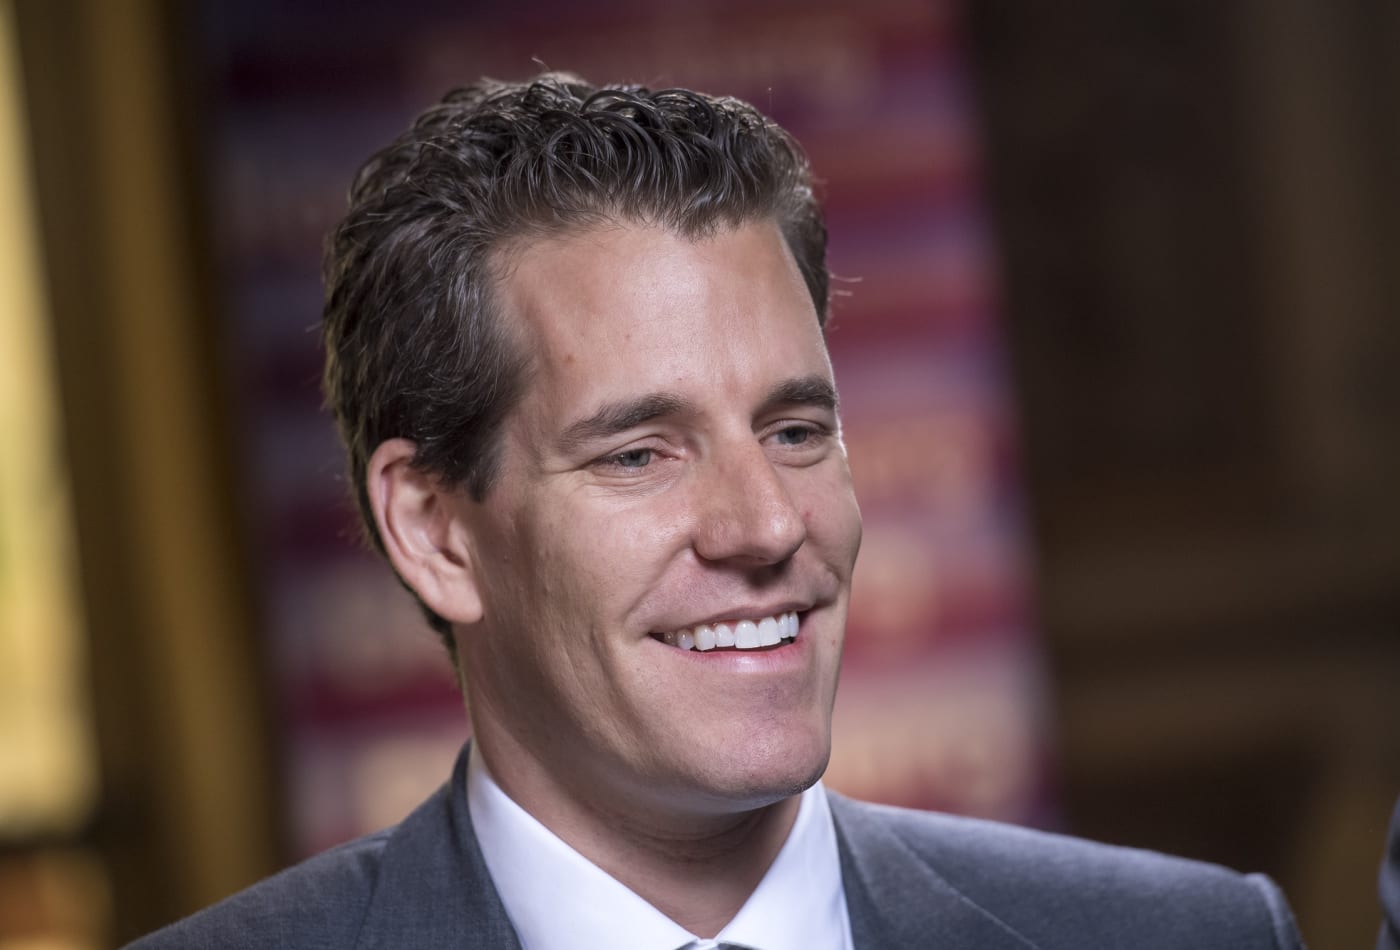 Not having BTC today will be a worse investment decision than not investing in Amazon in the eyes of Cameron Winklevoss, co-founder of Gemini.